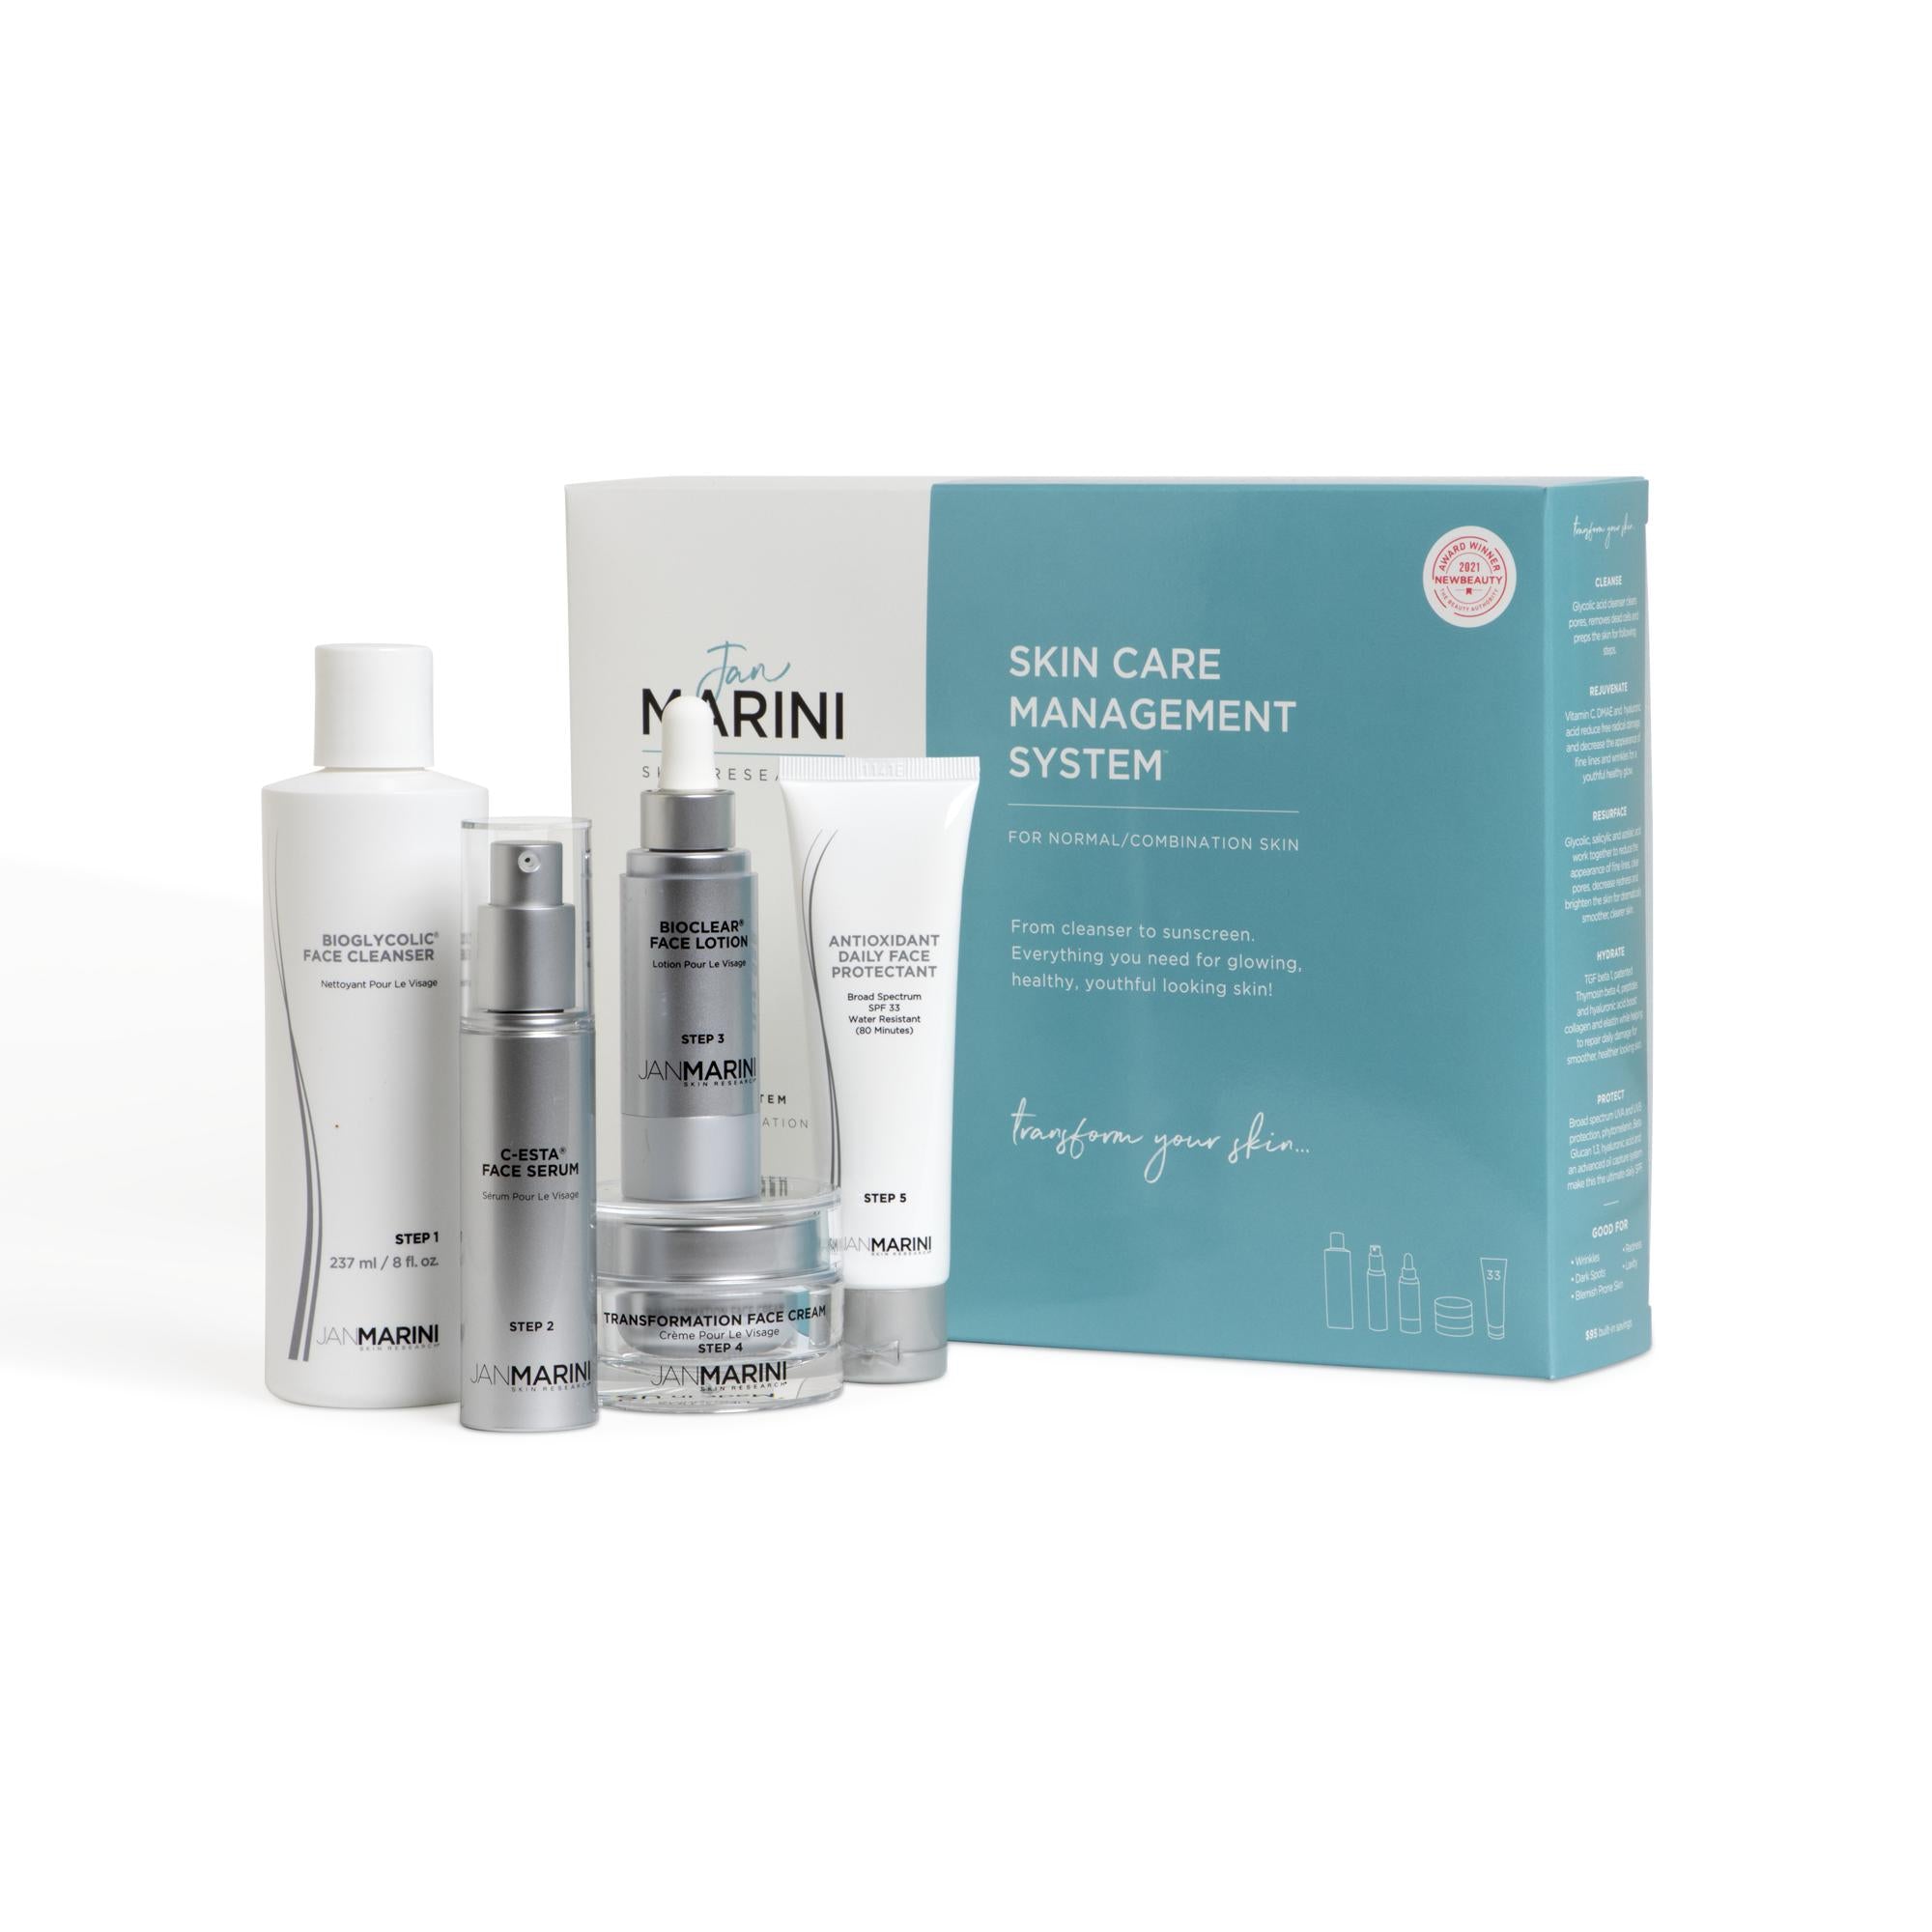 Jan Marini Skin Care Management System - Normal Combo w/ DFP SPF 33